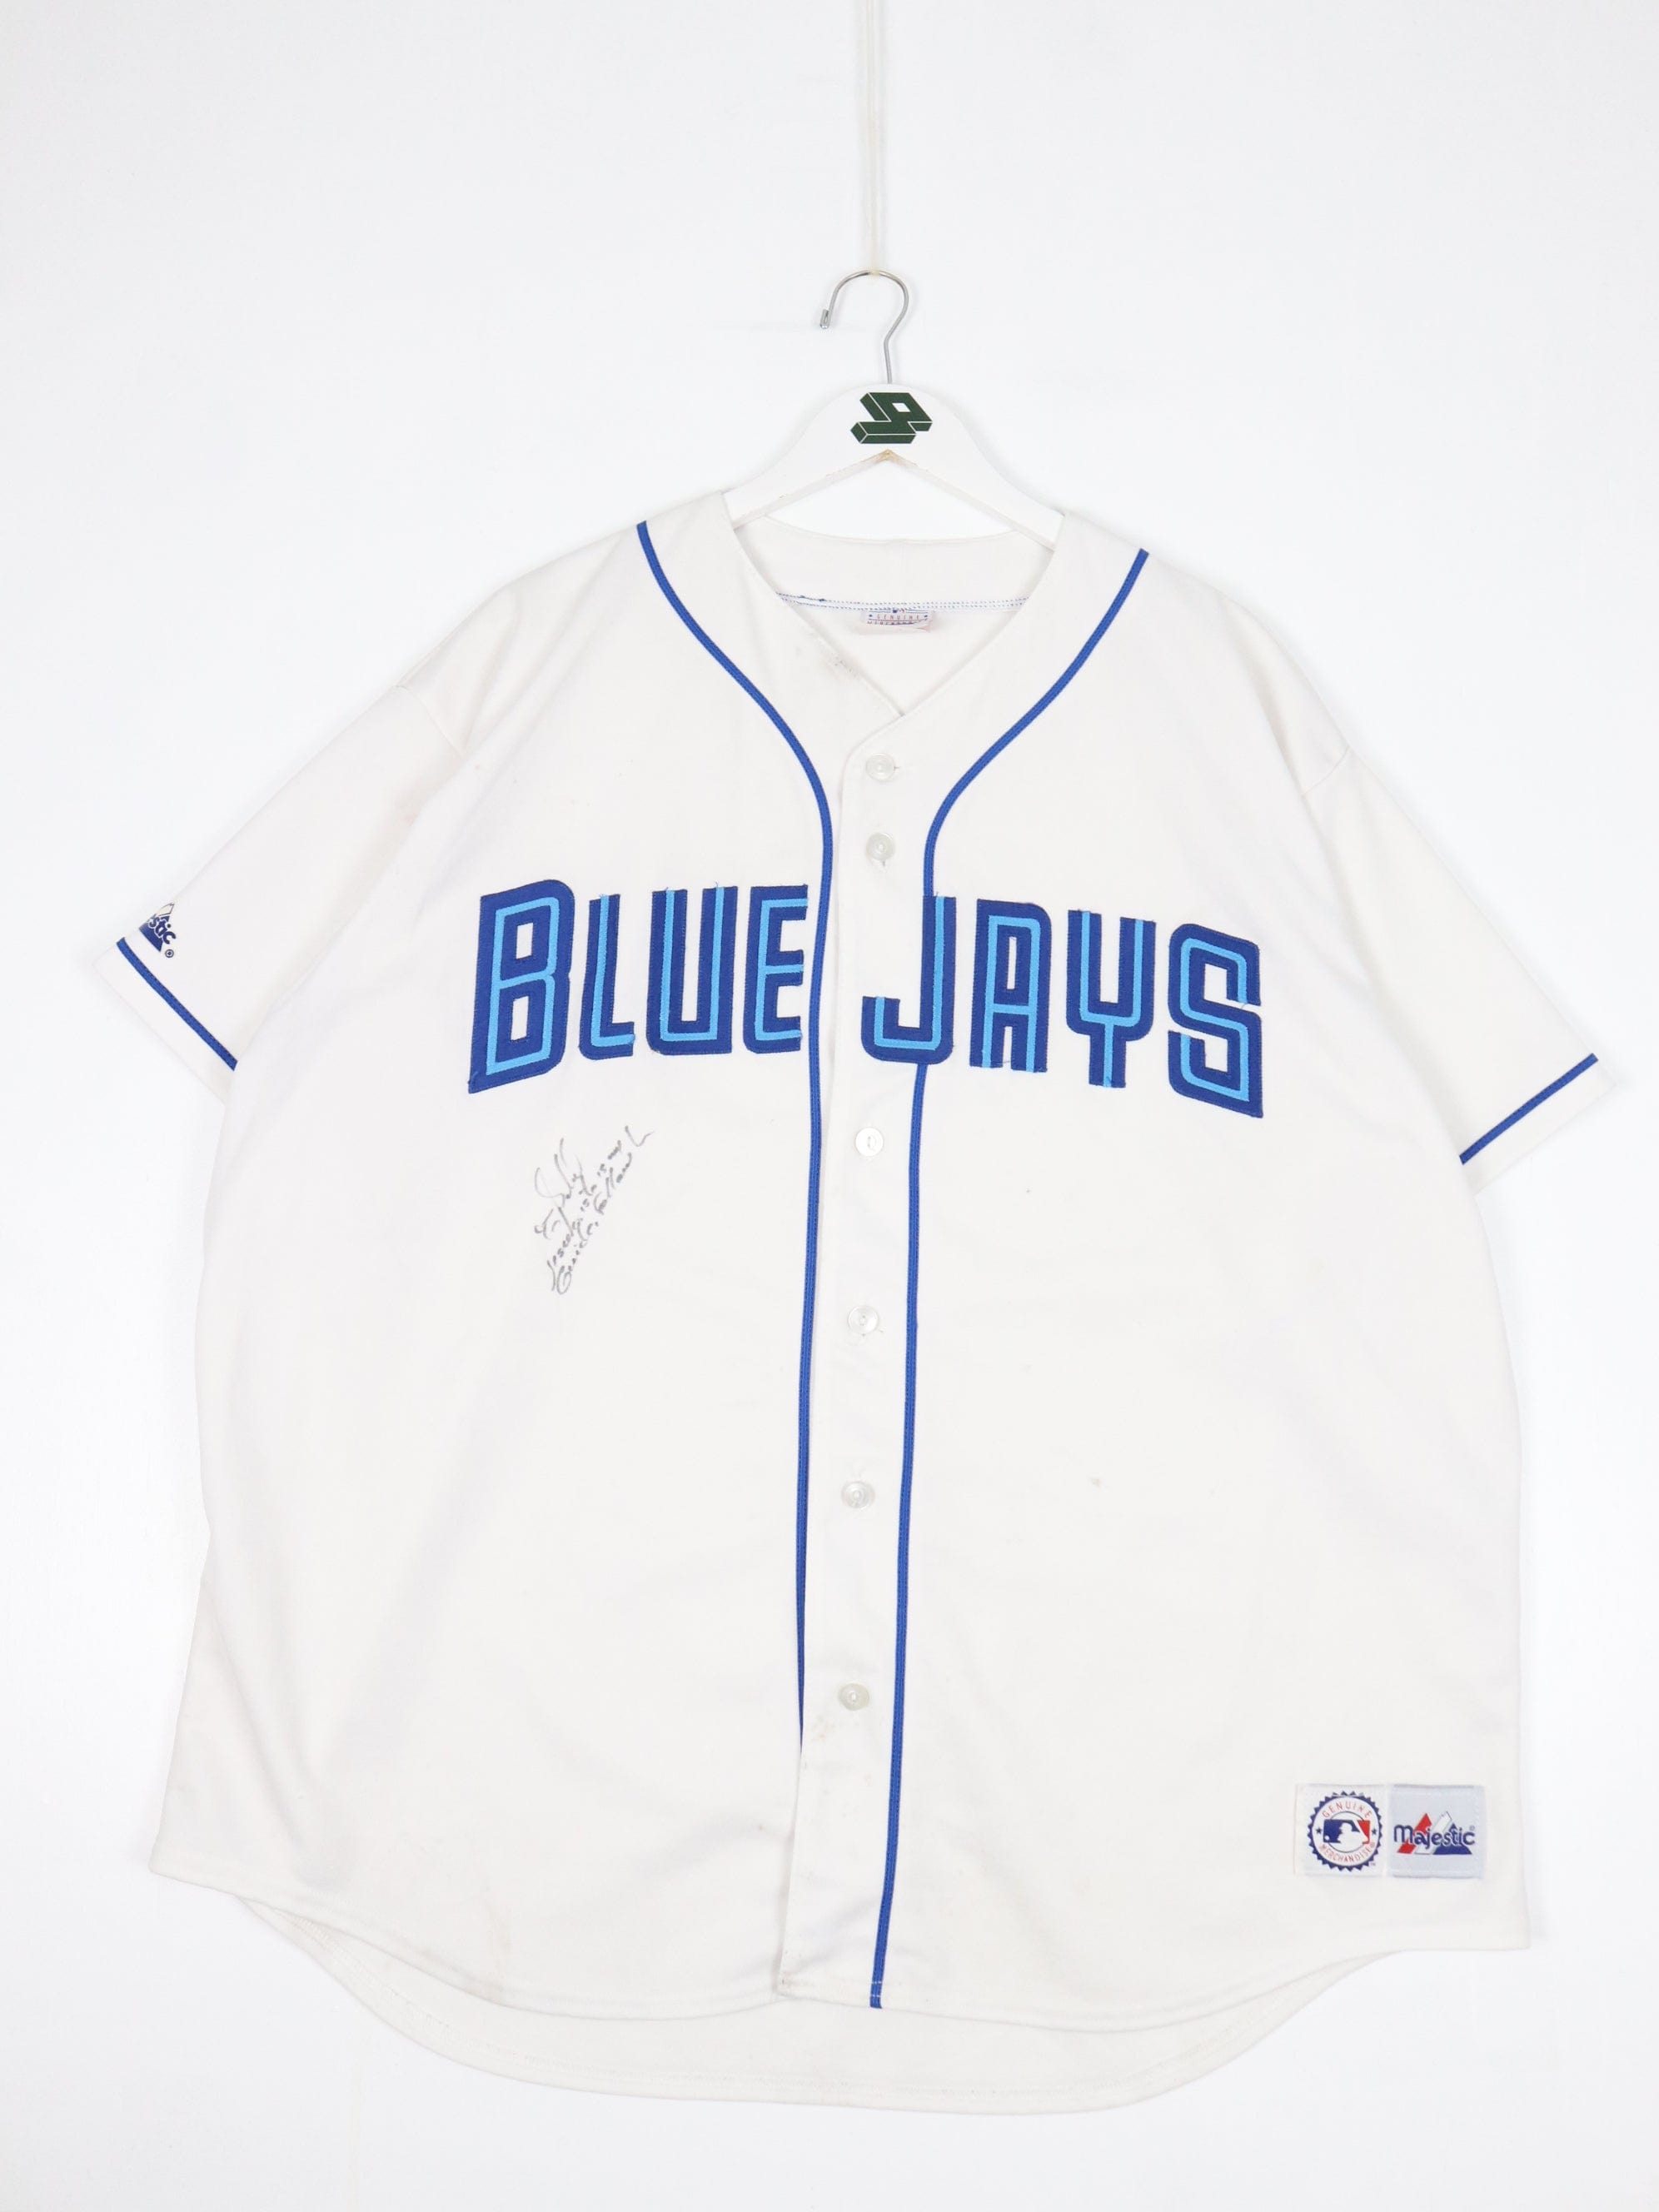 The Blue Jays “New Blue” Jerseys have a record of 6-1 (2nd best in MLB) : r/ Torontobluejays